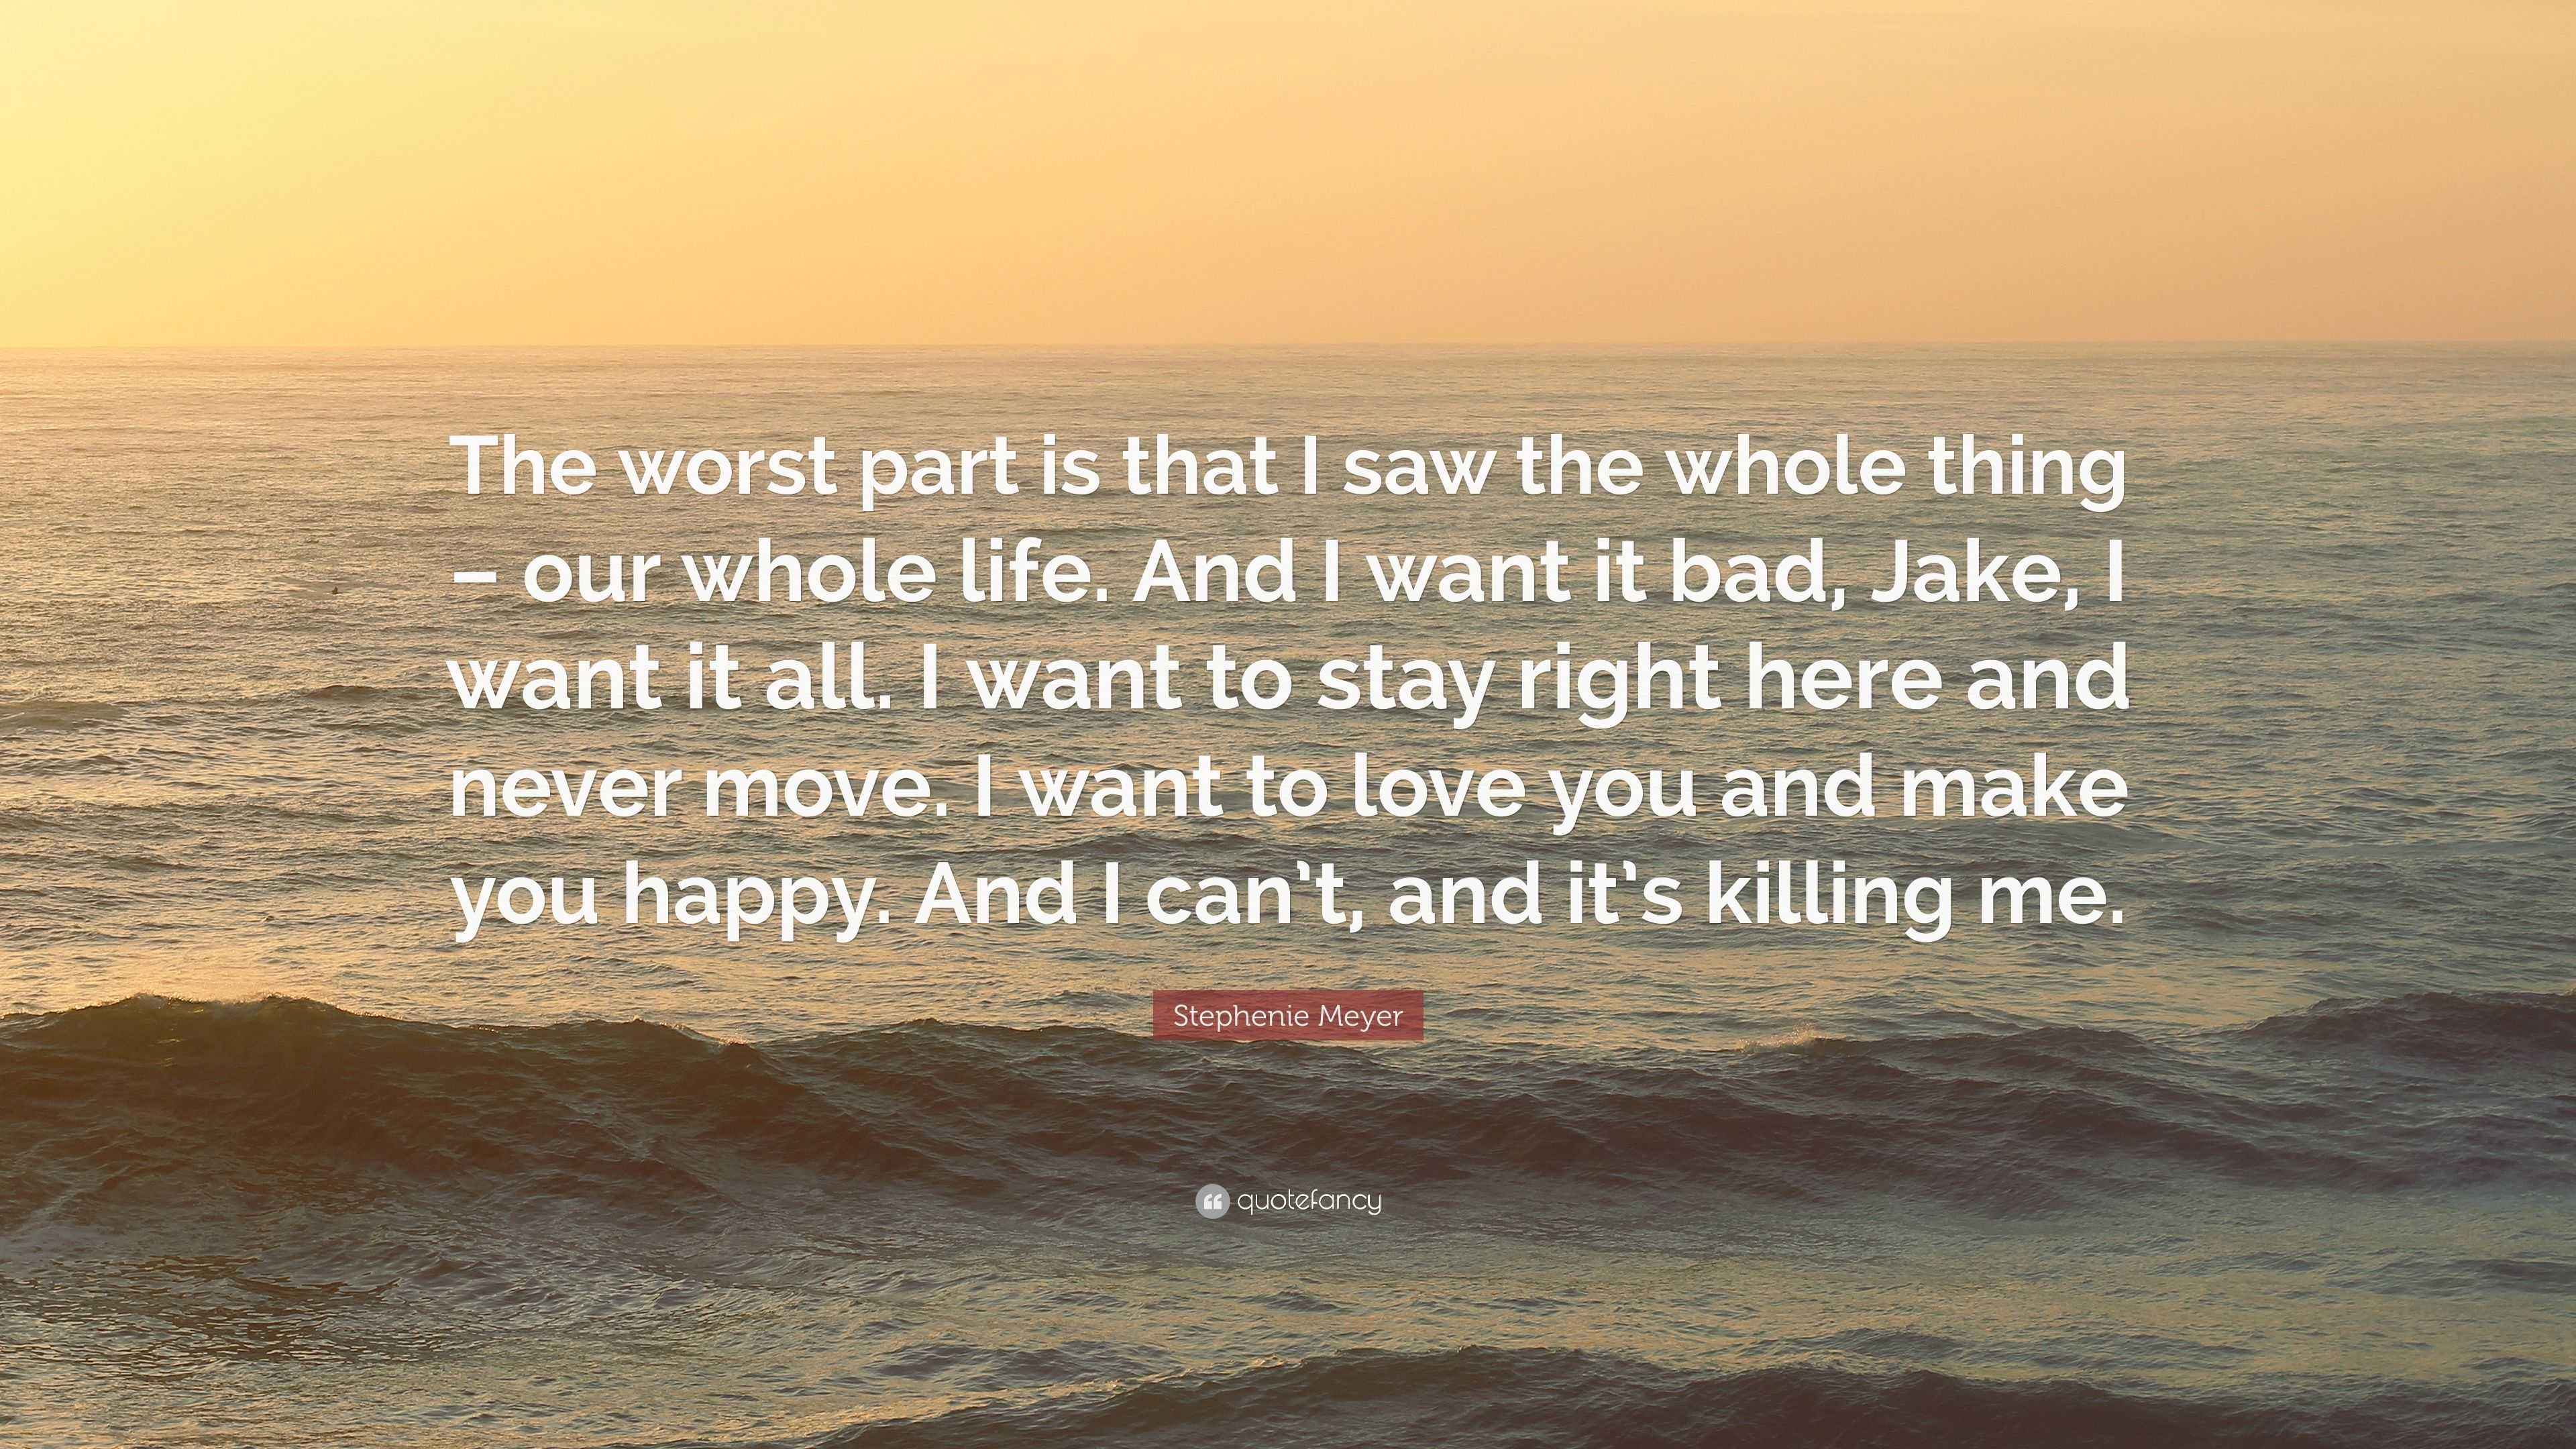 Stephenie Meyer Quote “The worst part is that I saw the whole thing –